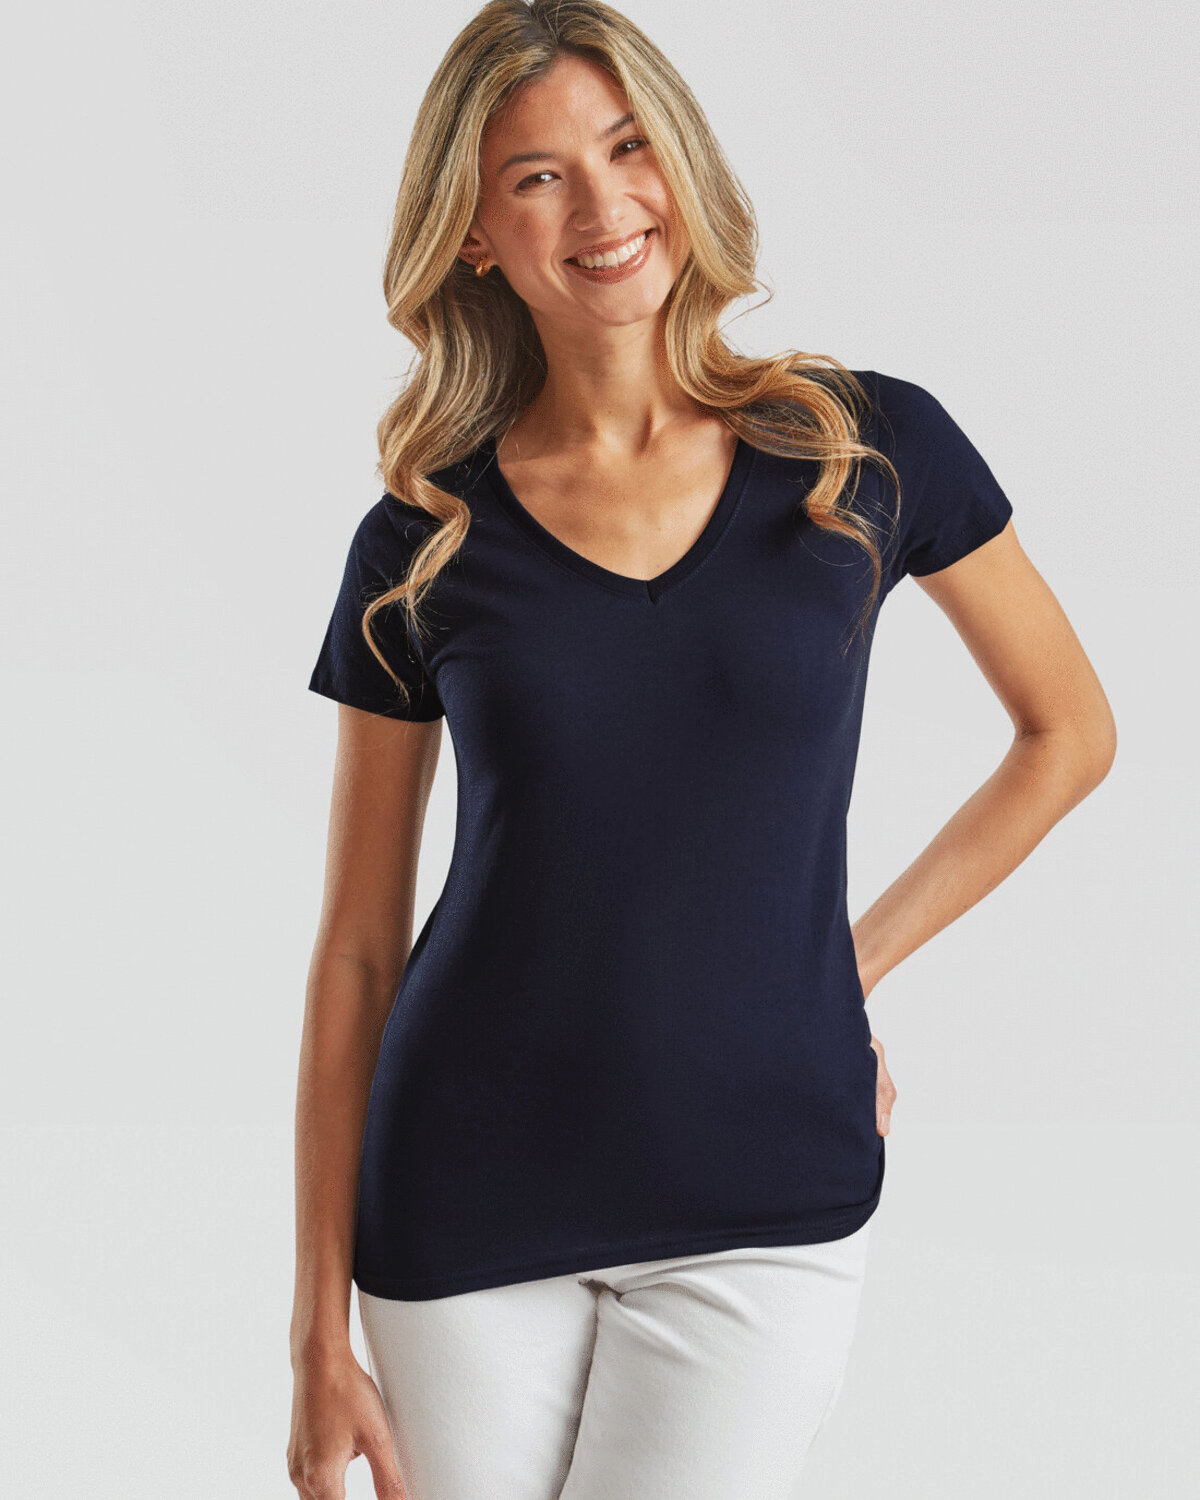 SS045M-LADIES VALUEWEIGHT V-NECK T